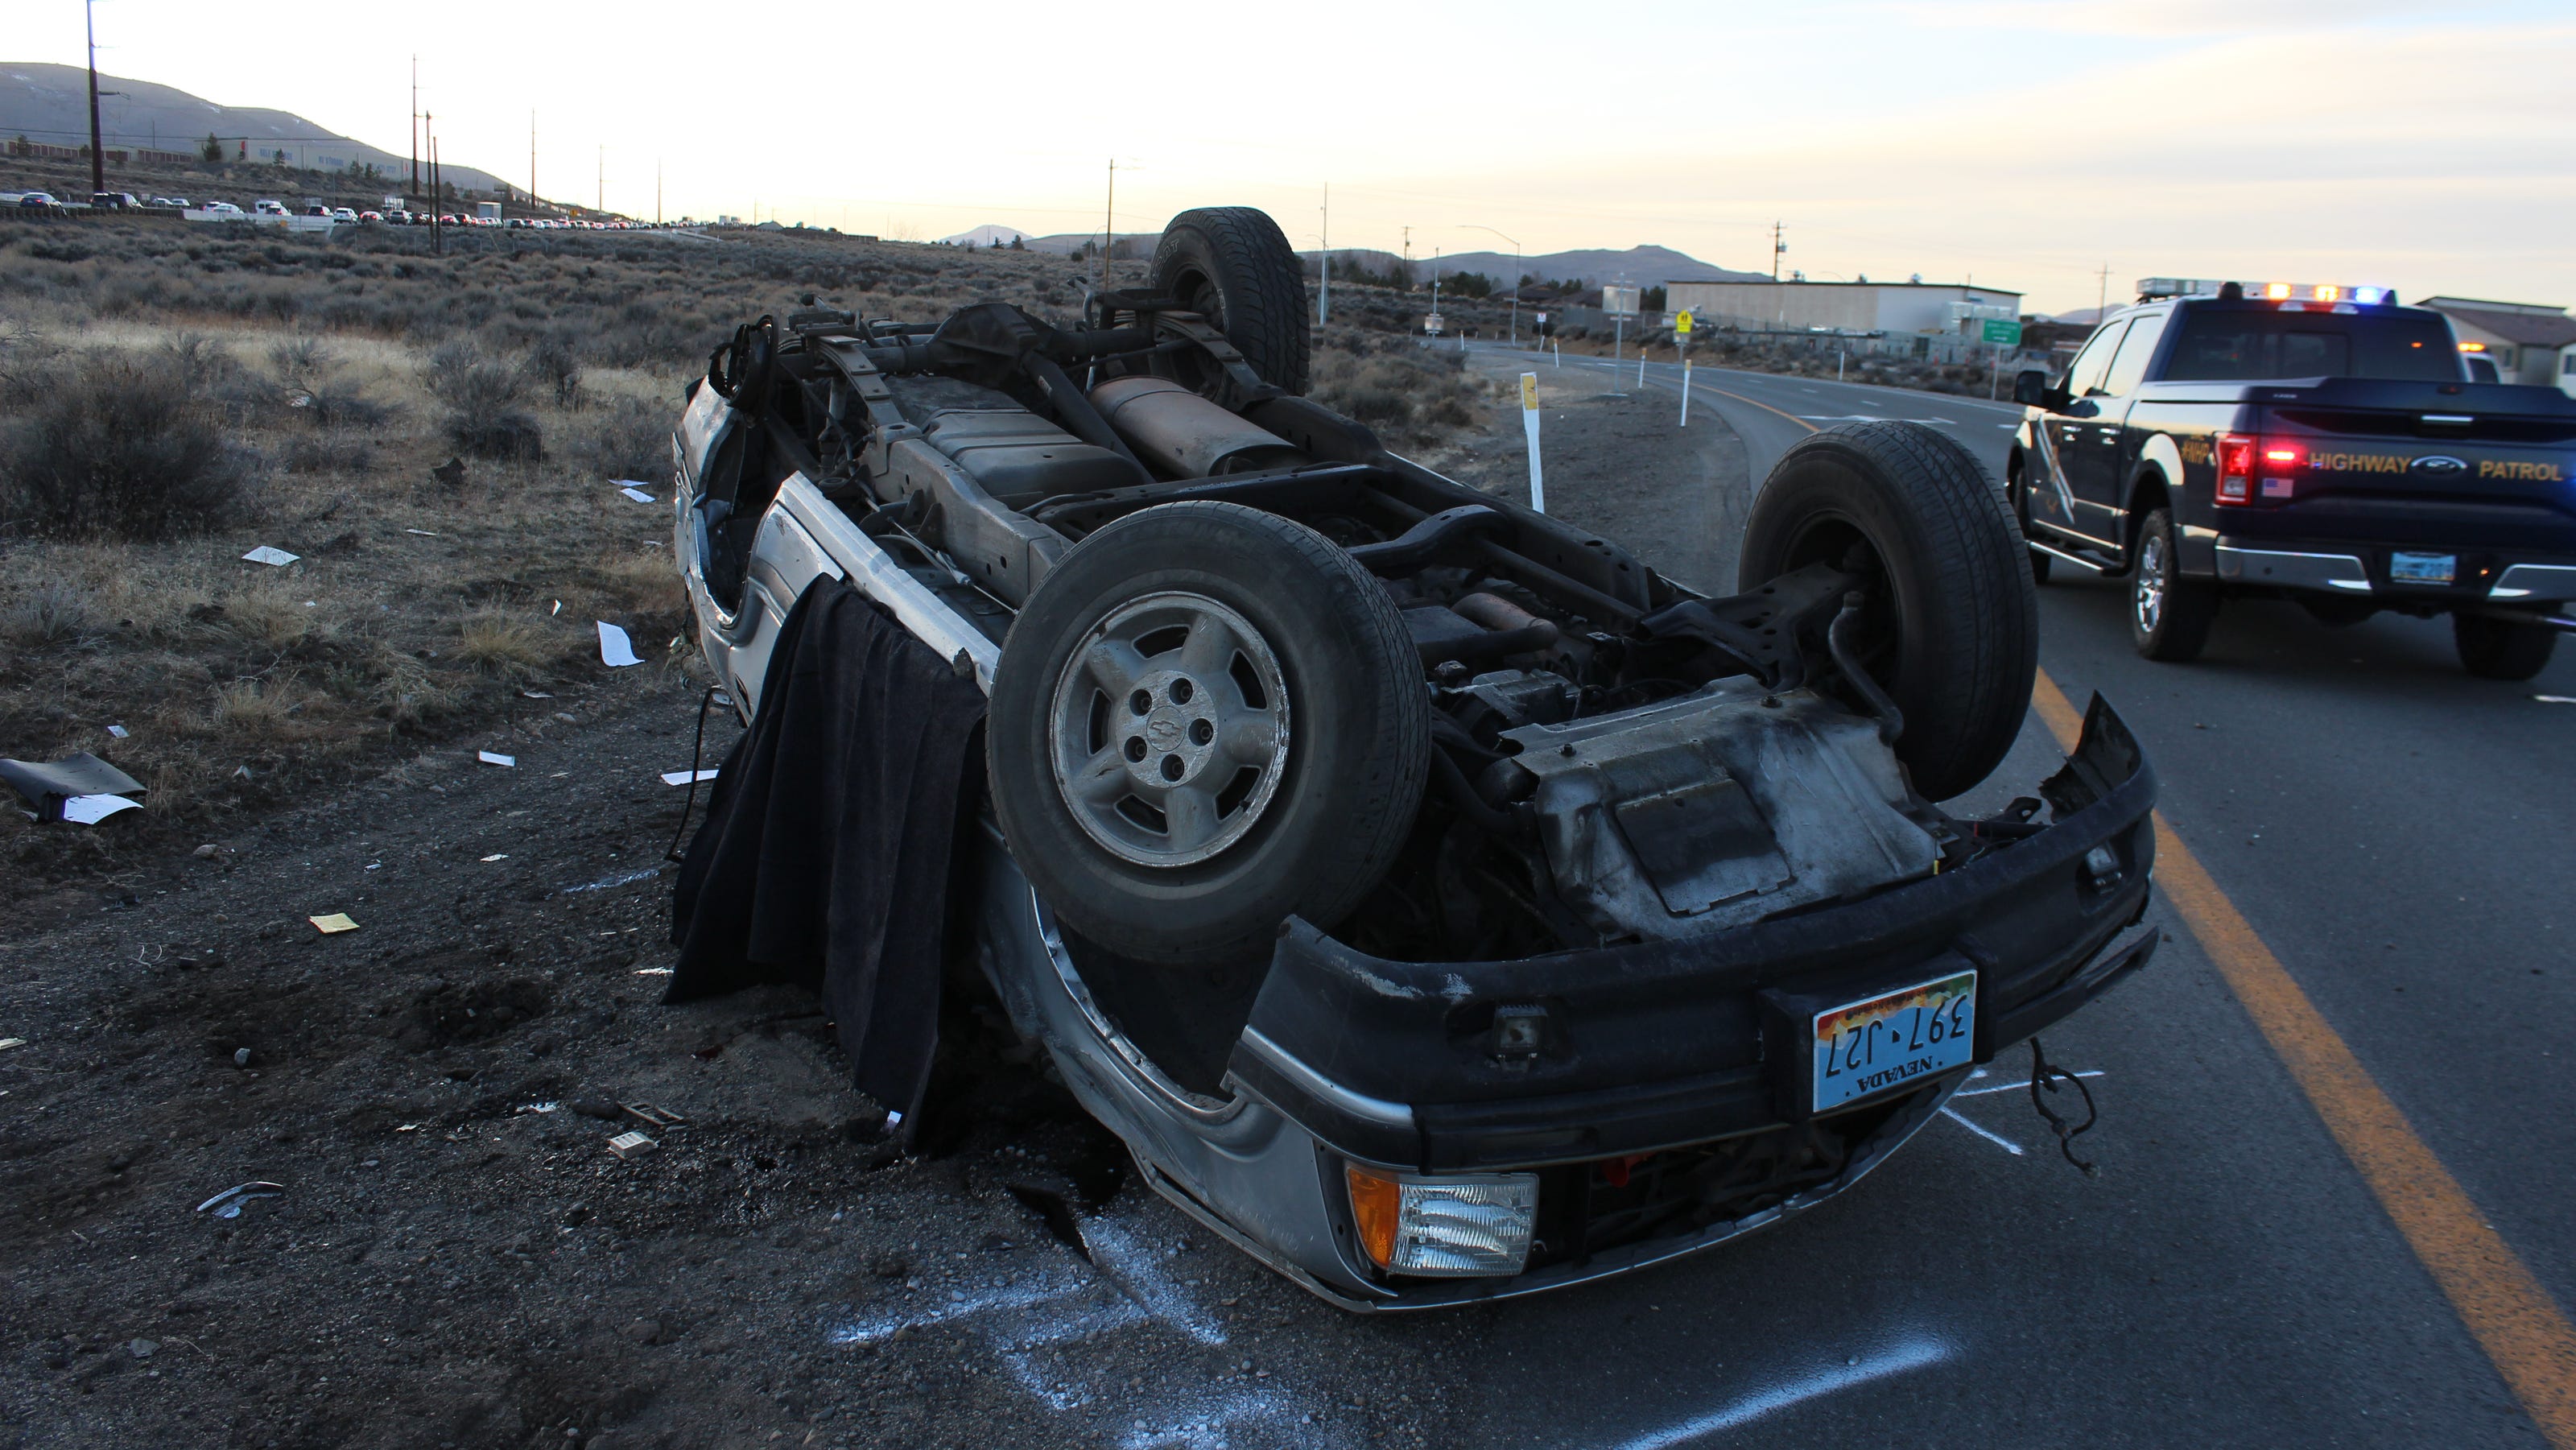 Fatal car crashes spiked by 21 in Washoe County in 2020